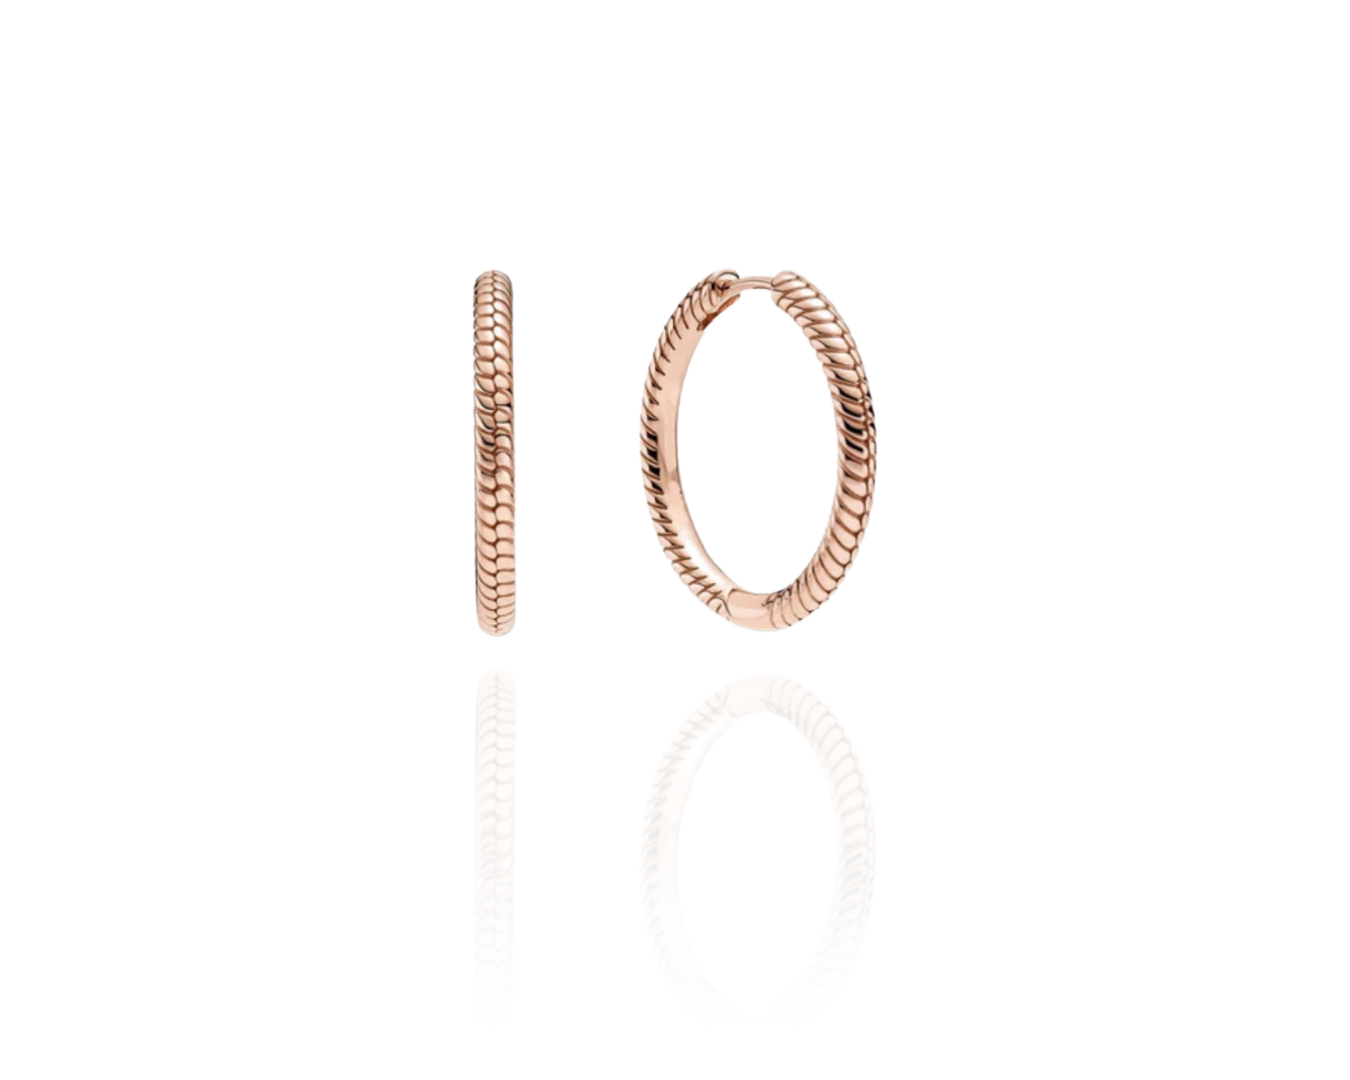 14k Rose Gold-Plated 925 Sterling Silver Hoops